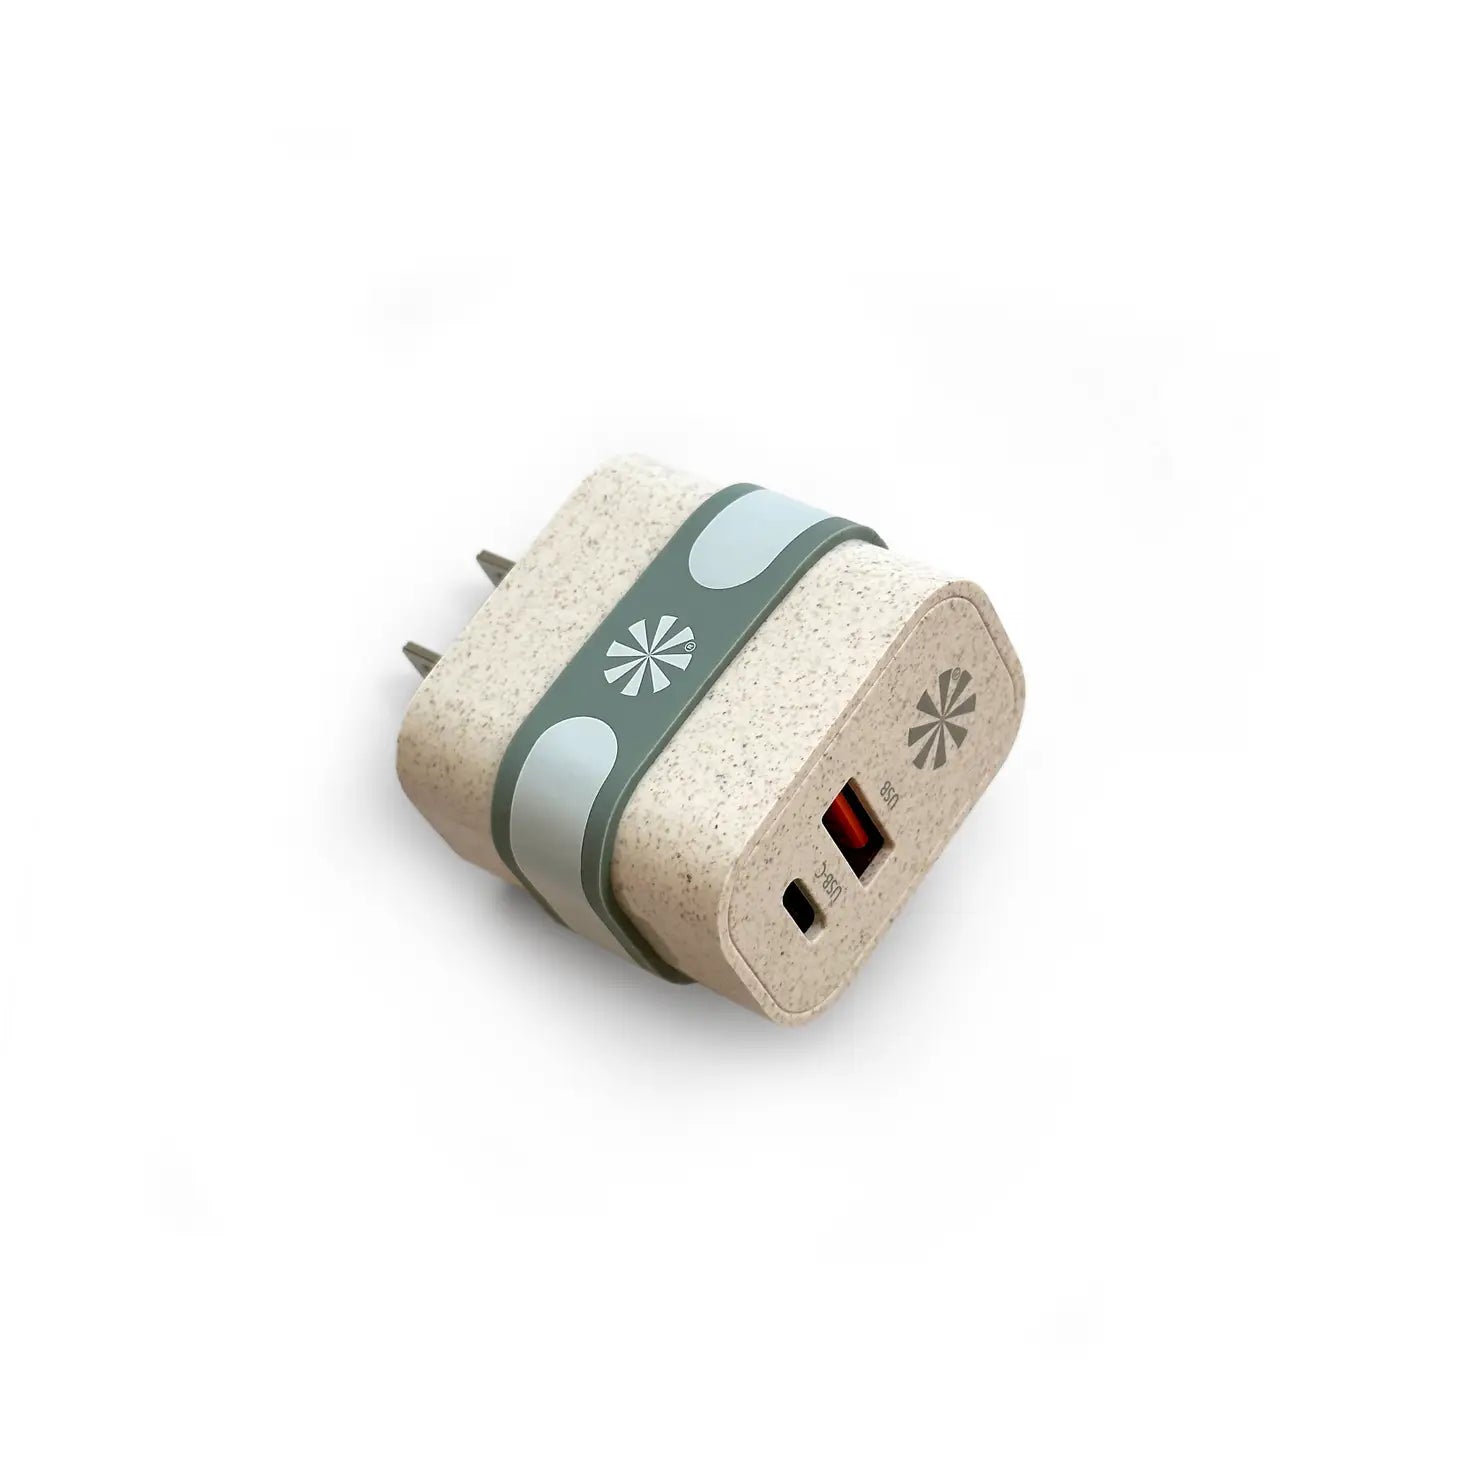 Double Play Eco Wall Power Adapter - Natural